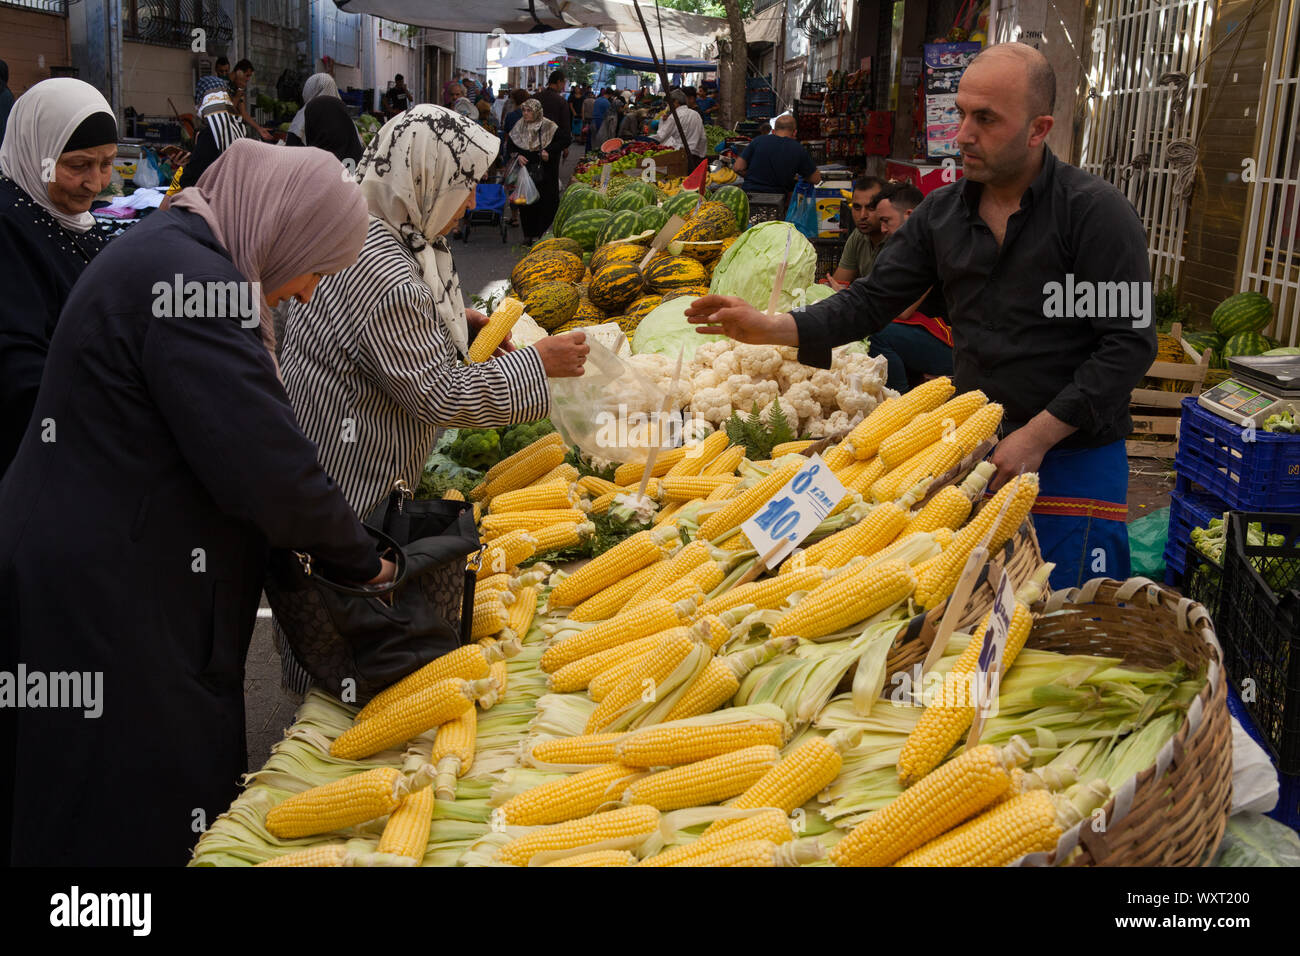 Maize and sweetcorn vendor at the market in the Fatih district of Istanbul, Turkey Stock Photo